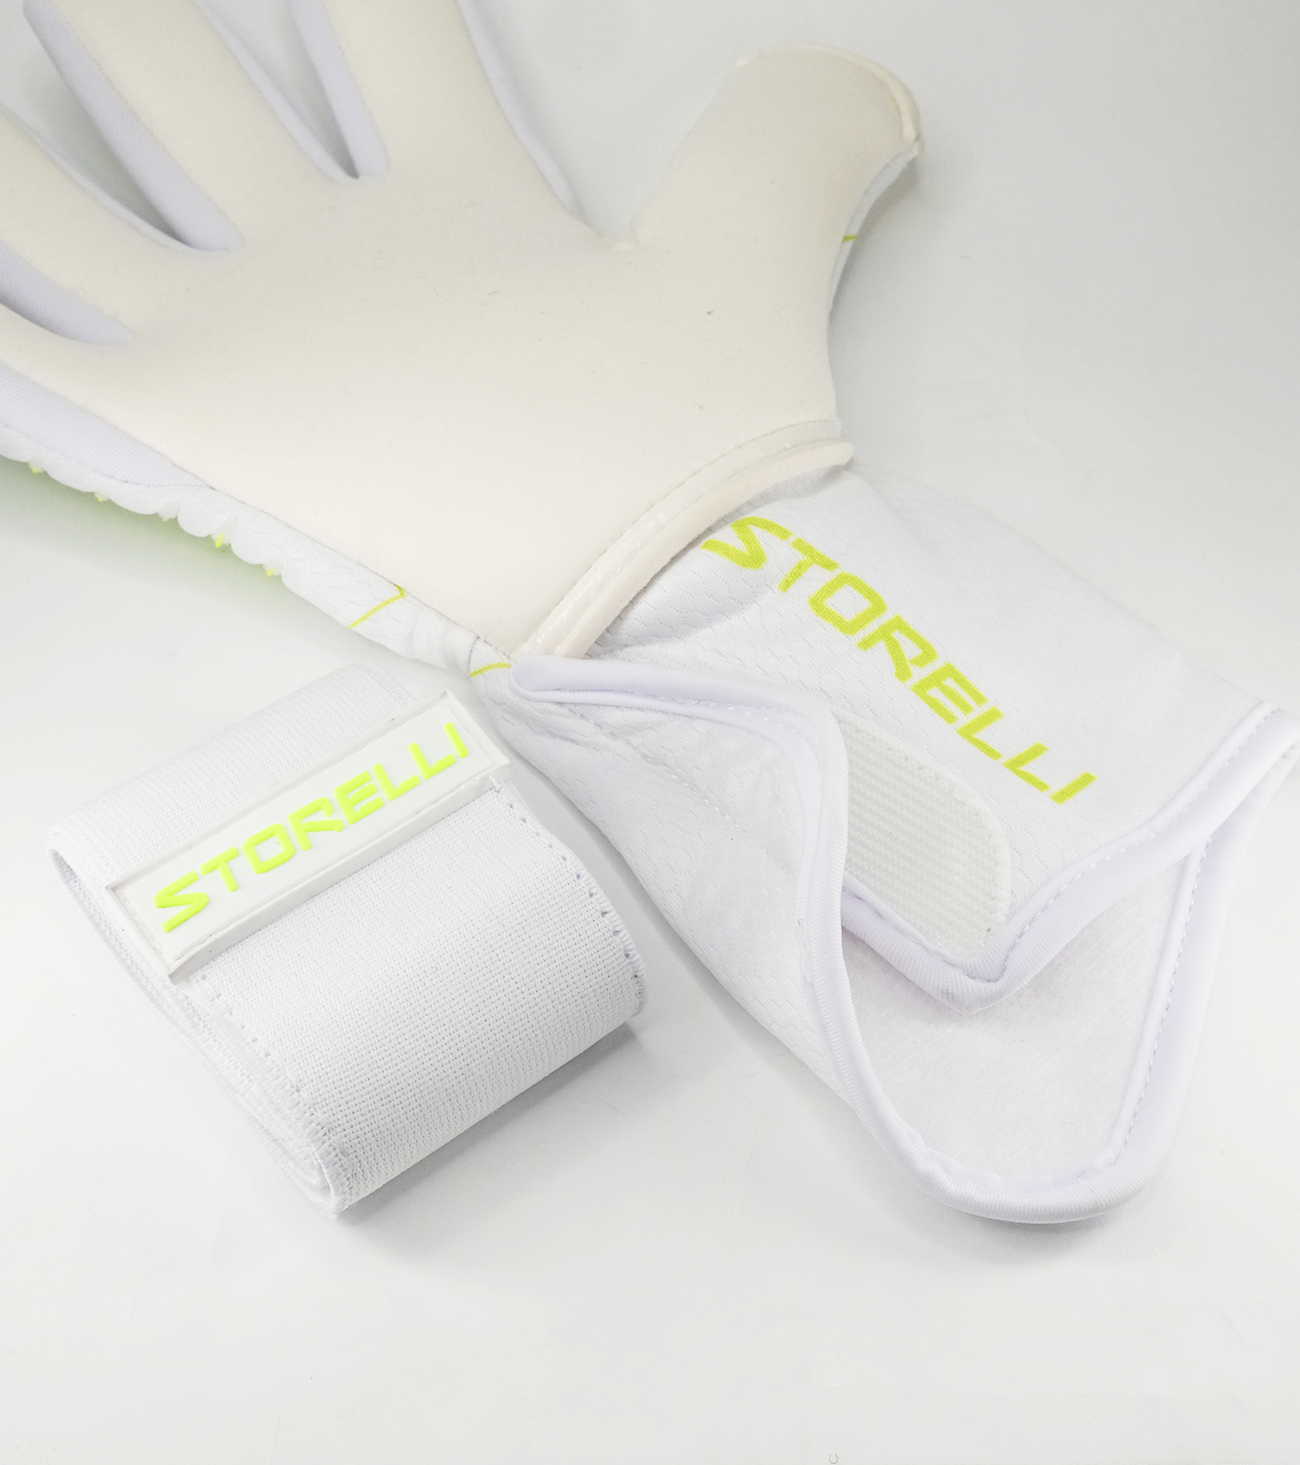 Storelli Electric White Finger Spine Protection Pro